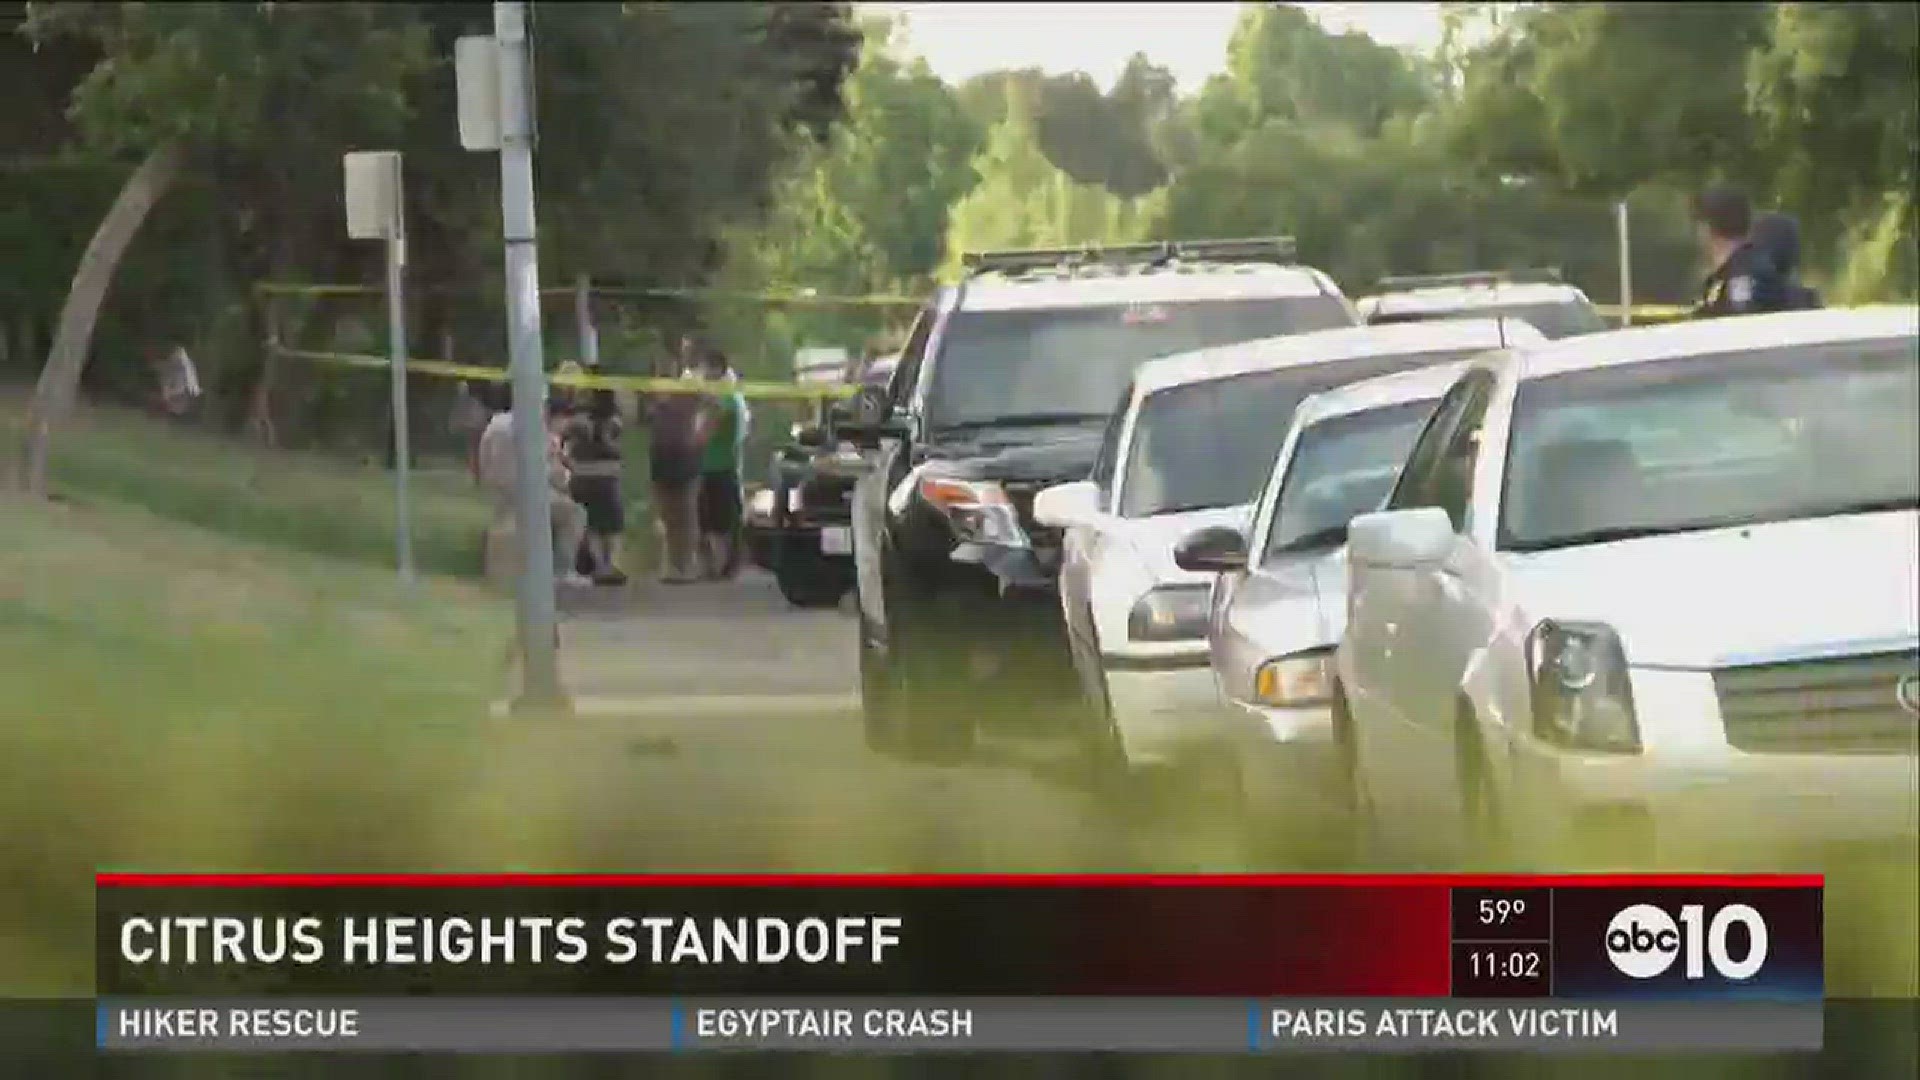 A man barricaded himself inside an apartment complex in Citrus Heights. (May 19, 2016)